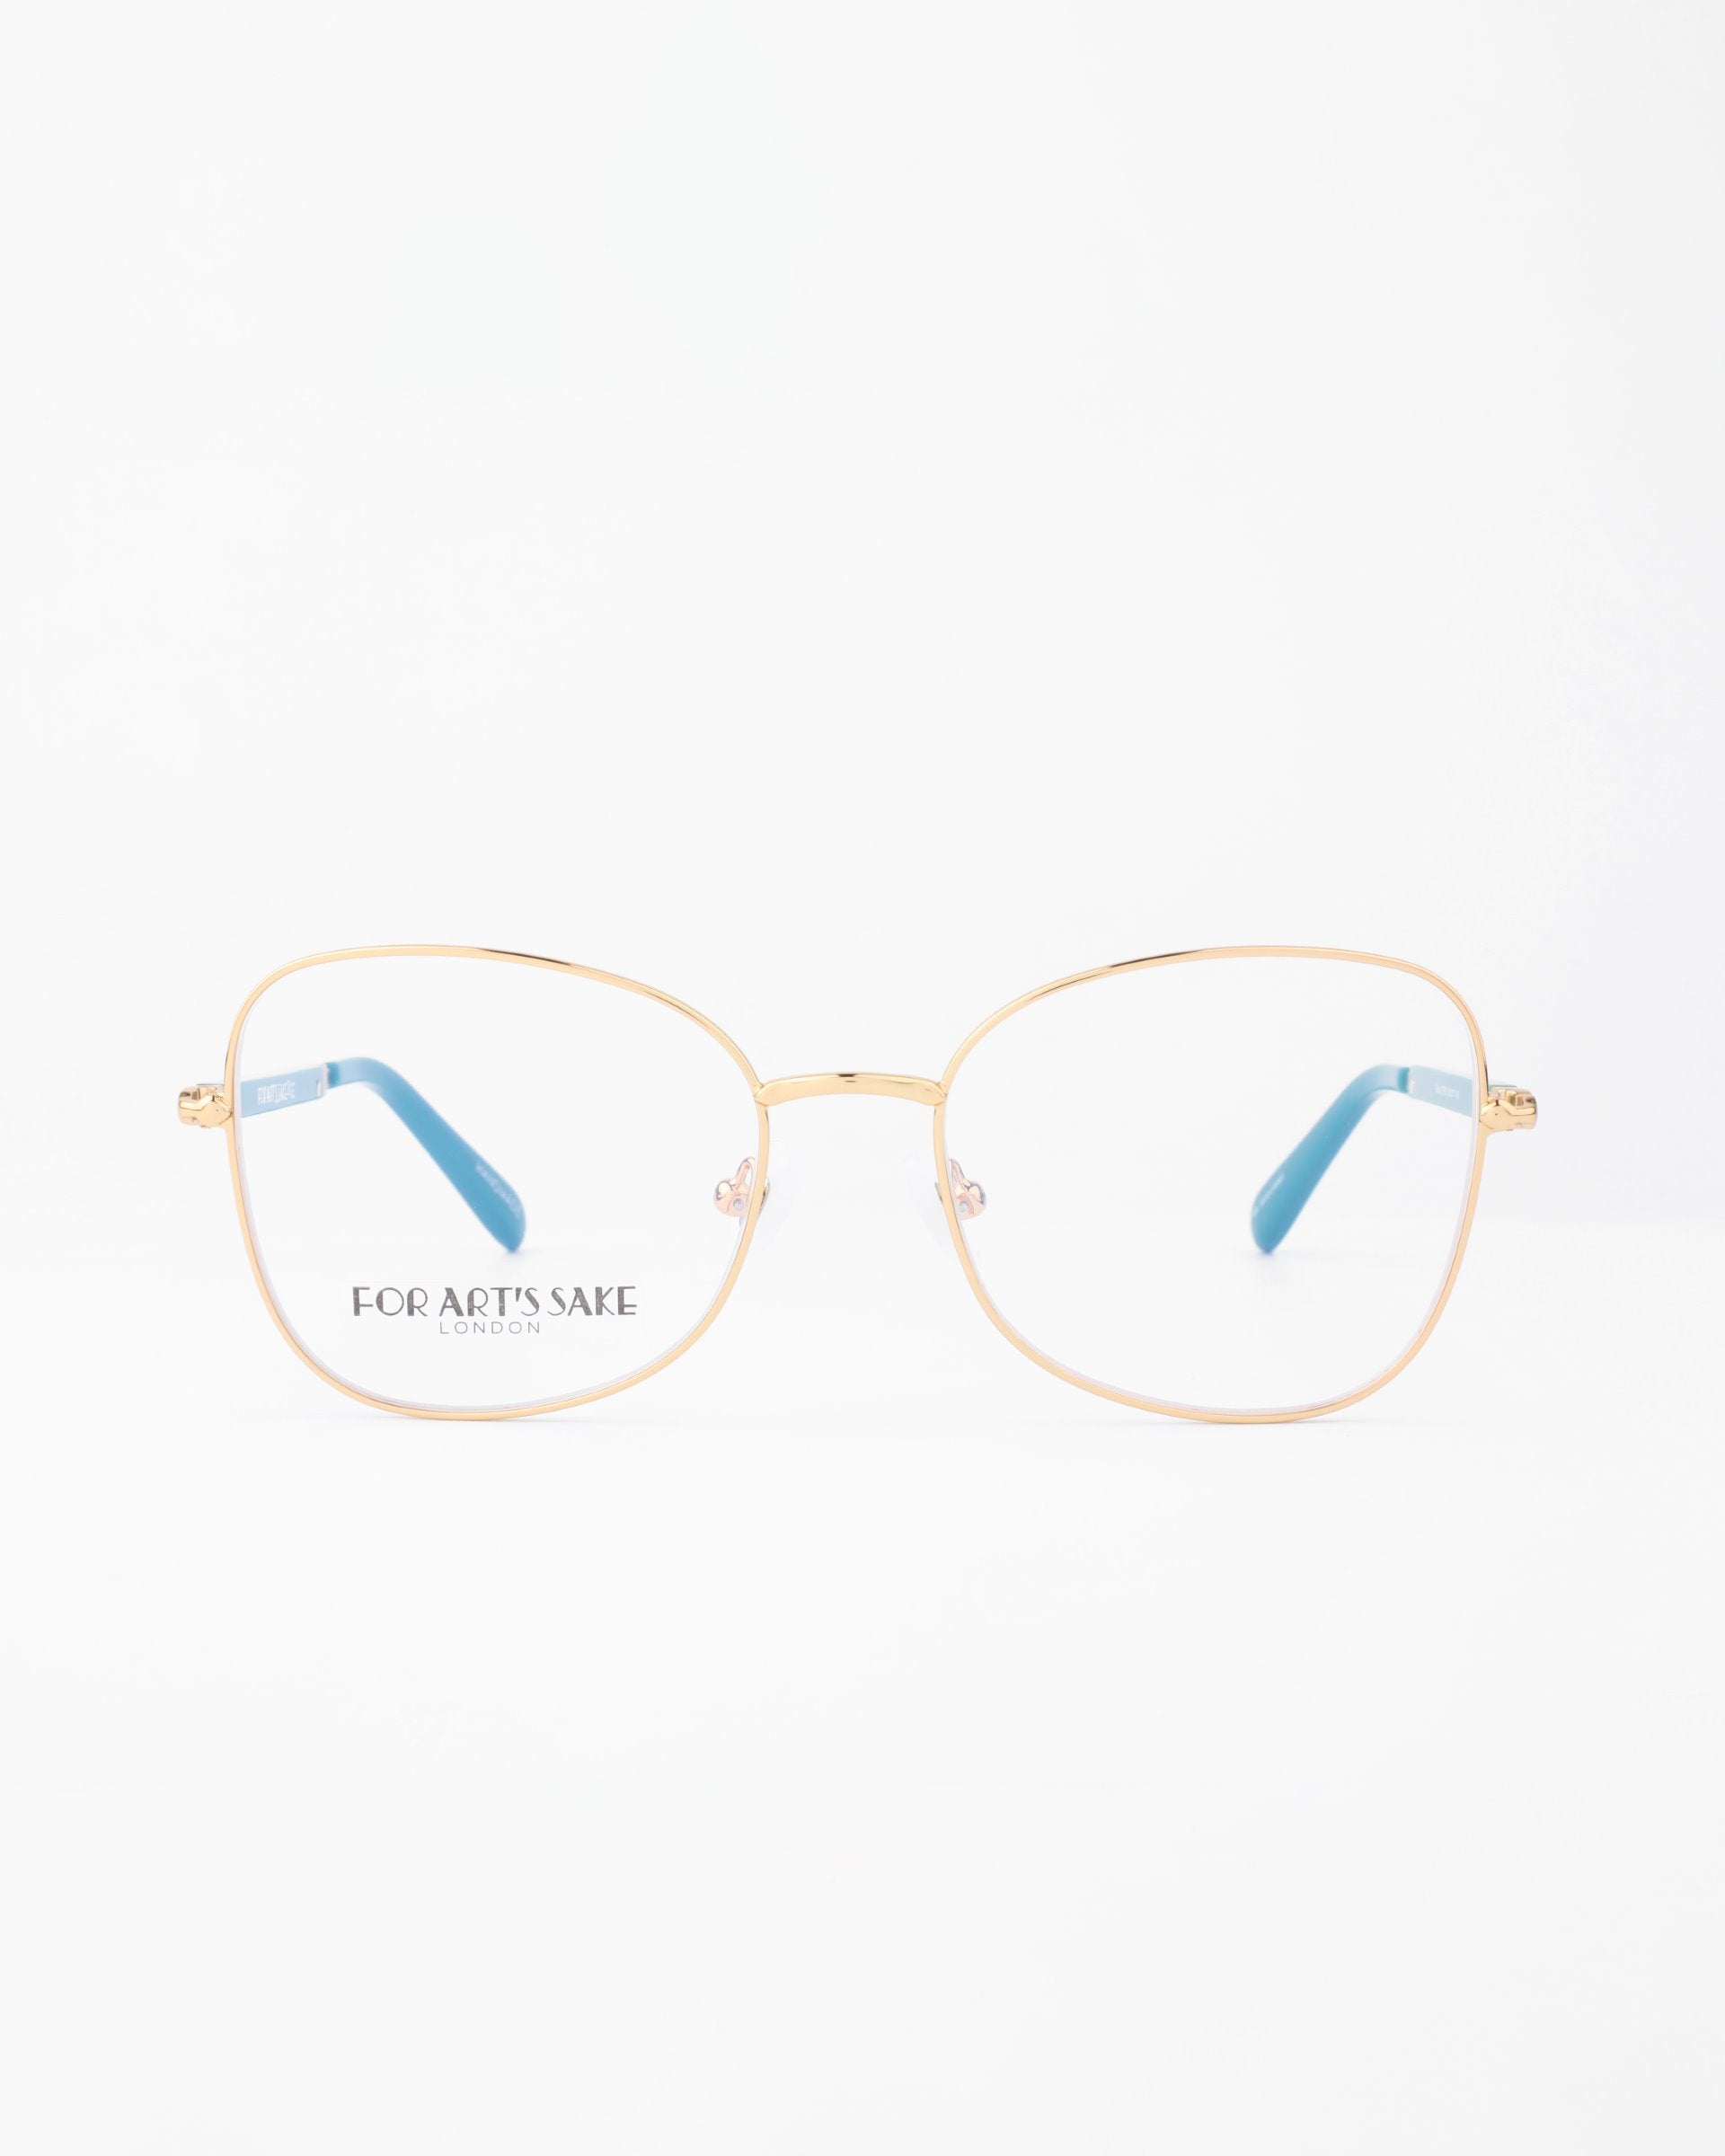 A pair of Grace eyeglasses by For Art&#39;s Sake® with thin, 18-karat gold-plated metal frames. The temples are gold with blue tips. The left lens has the phrase &quot;FOR ART&#39;S SAKE&quot; printed on it. The background is plain white, emphasizing the eyeglasses.